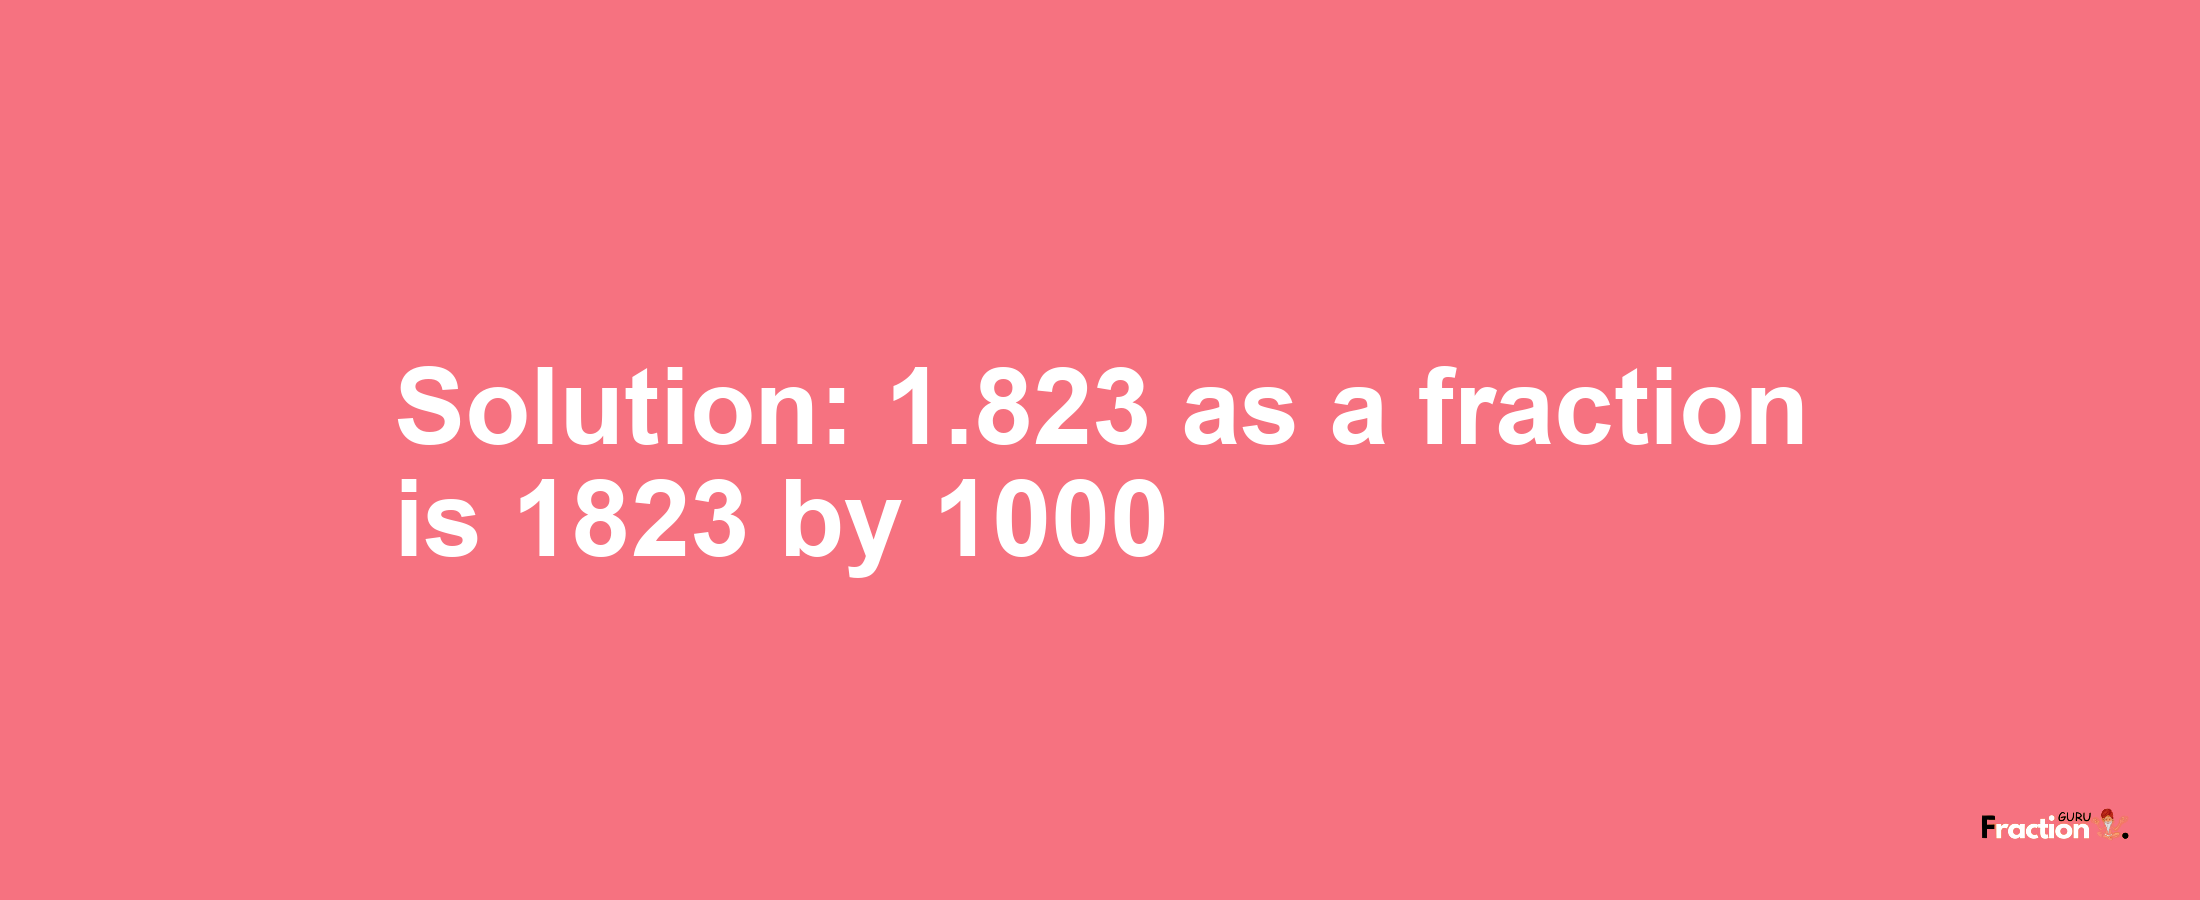 Solution:1.823 as a fraction is 1823/1000